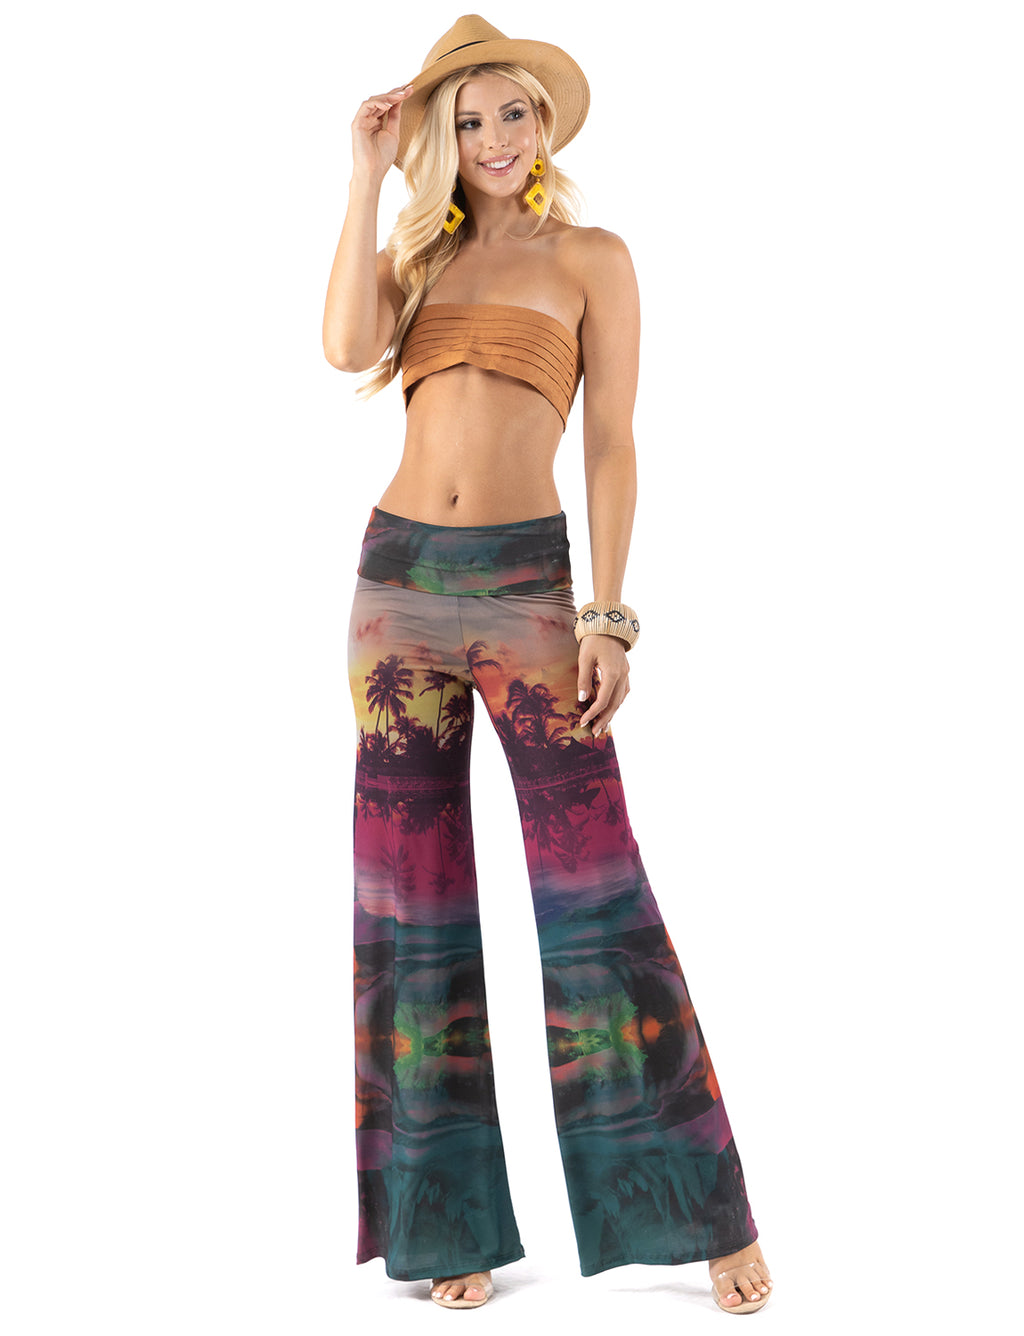 MultiColor Sunset vibe High waist palazzo pants featuring wide legs, and a comfortable stretchy fabric Perfect for any activity,relaxing day,beautiful and unique,comfortable and flattering